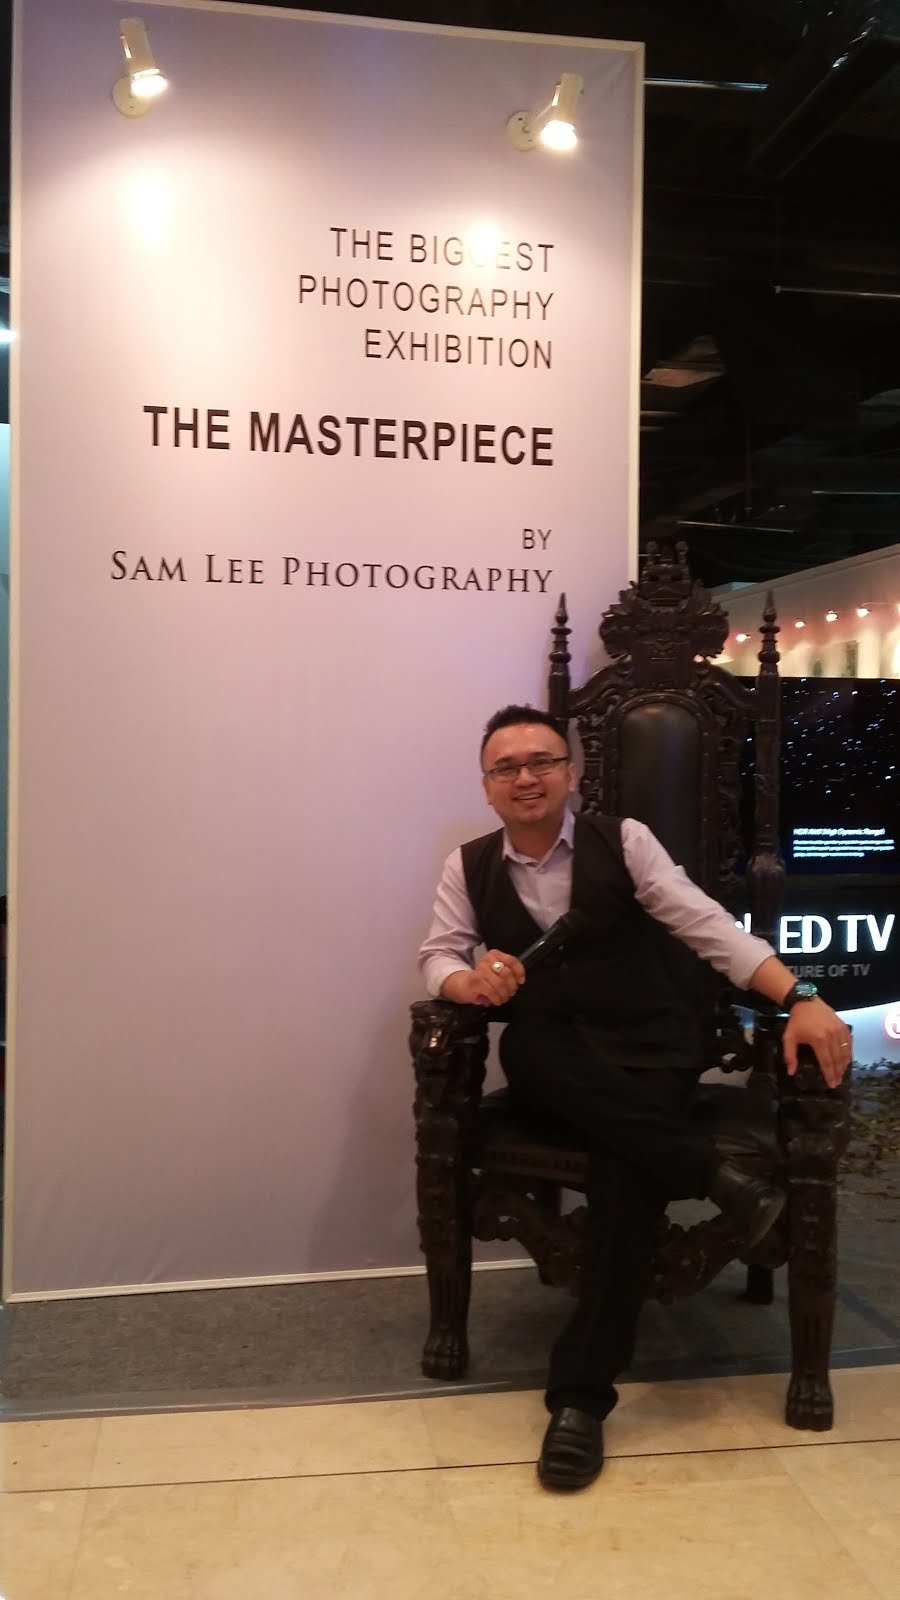 MC at NEW YORK ART BRIDAL OPEN HOUSE 2017 & THE MASTERPIECE-SAM LEE PHOTOGRAPHY EXHIBITION